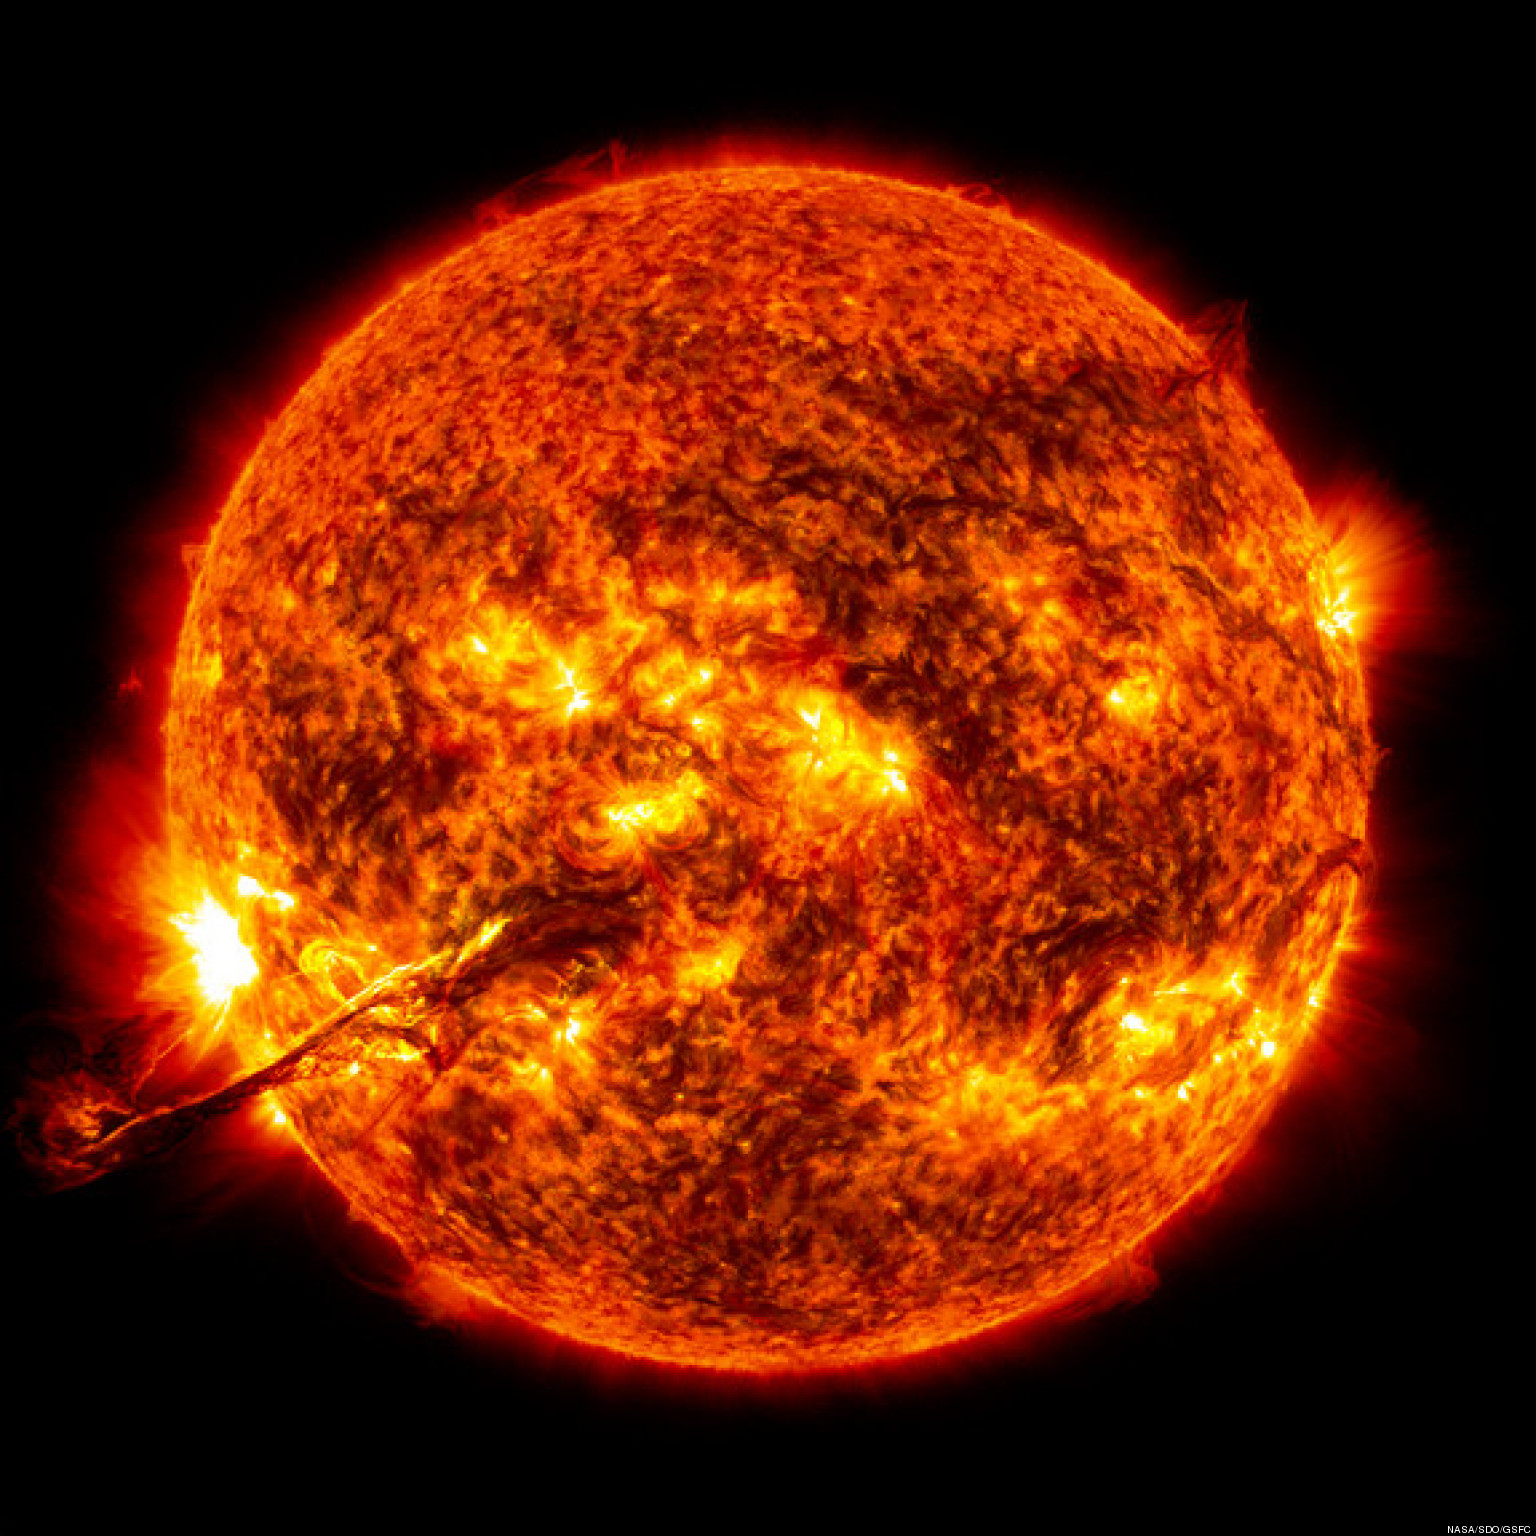 Compare Sun Images - Visible Light and Ultraviolet | UCAR 